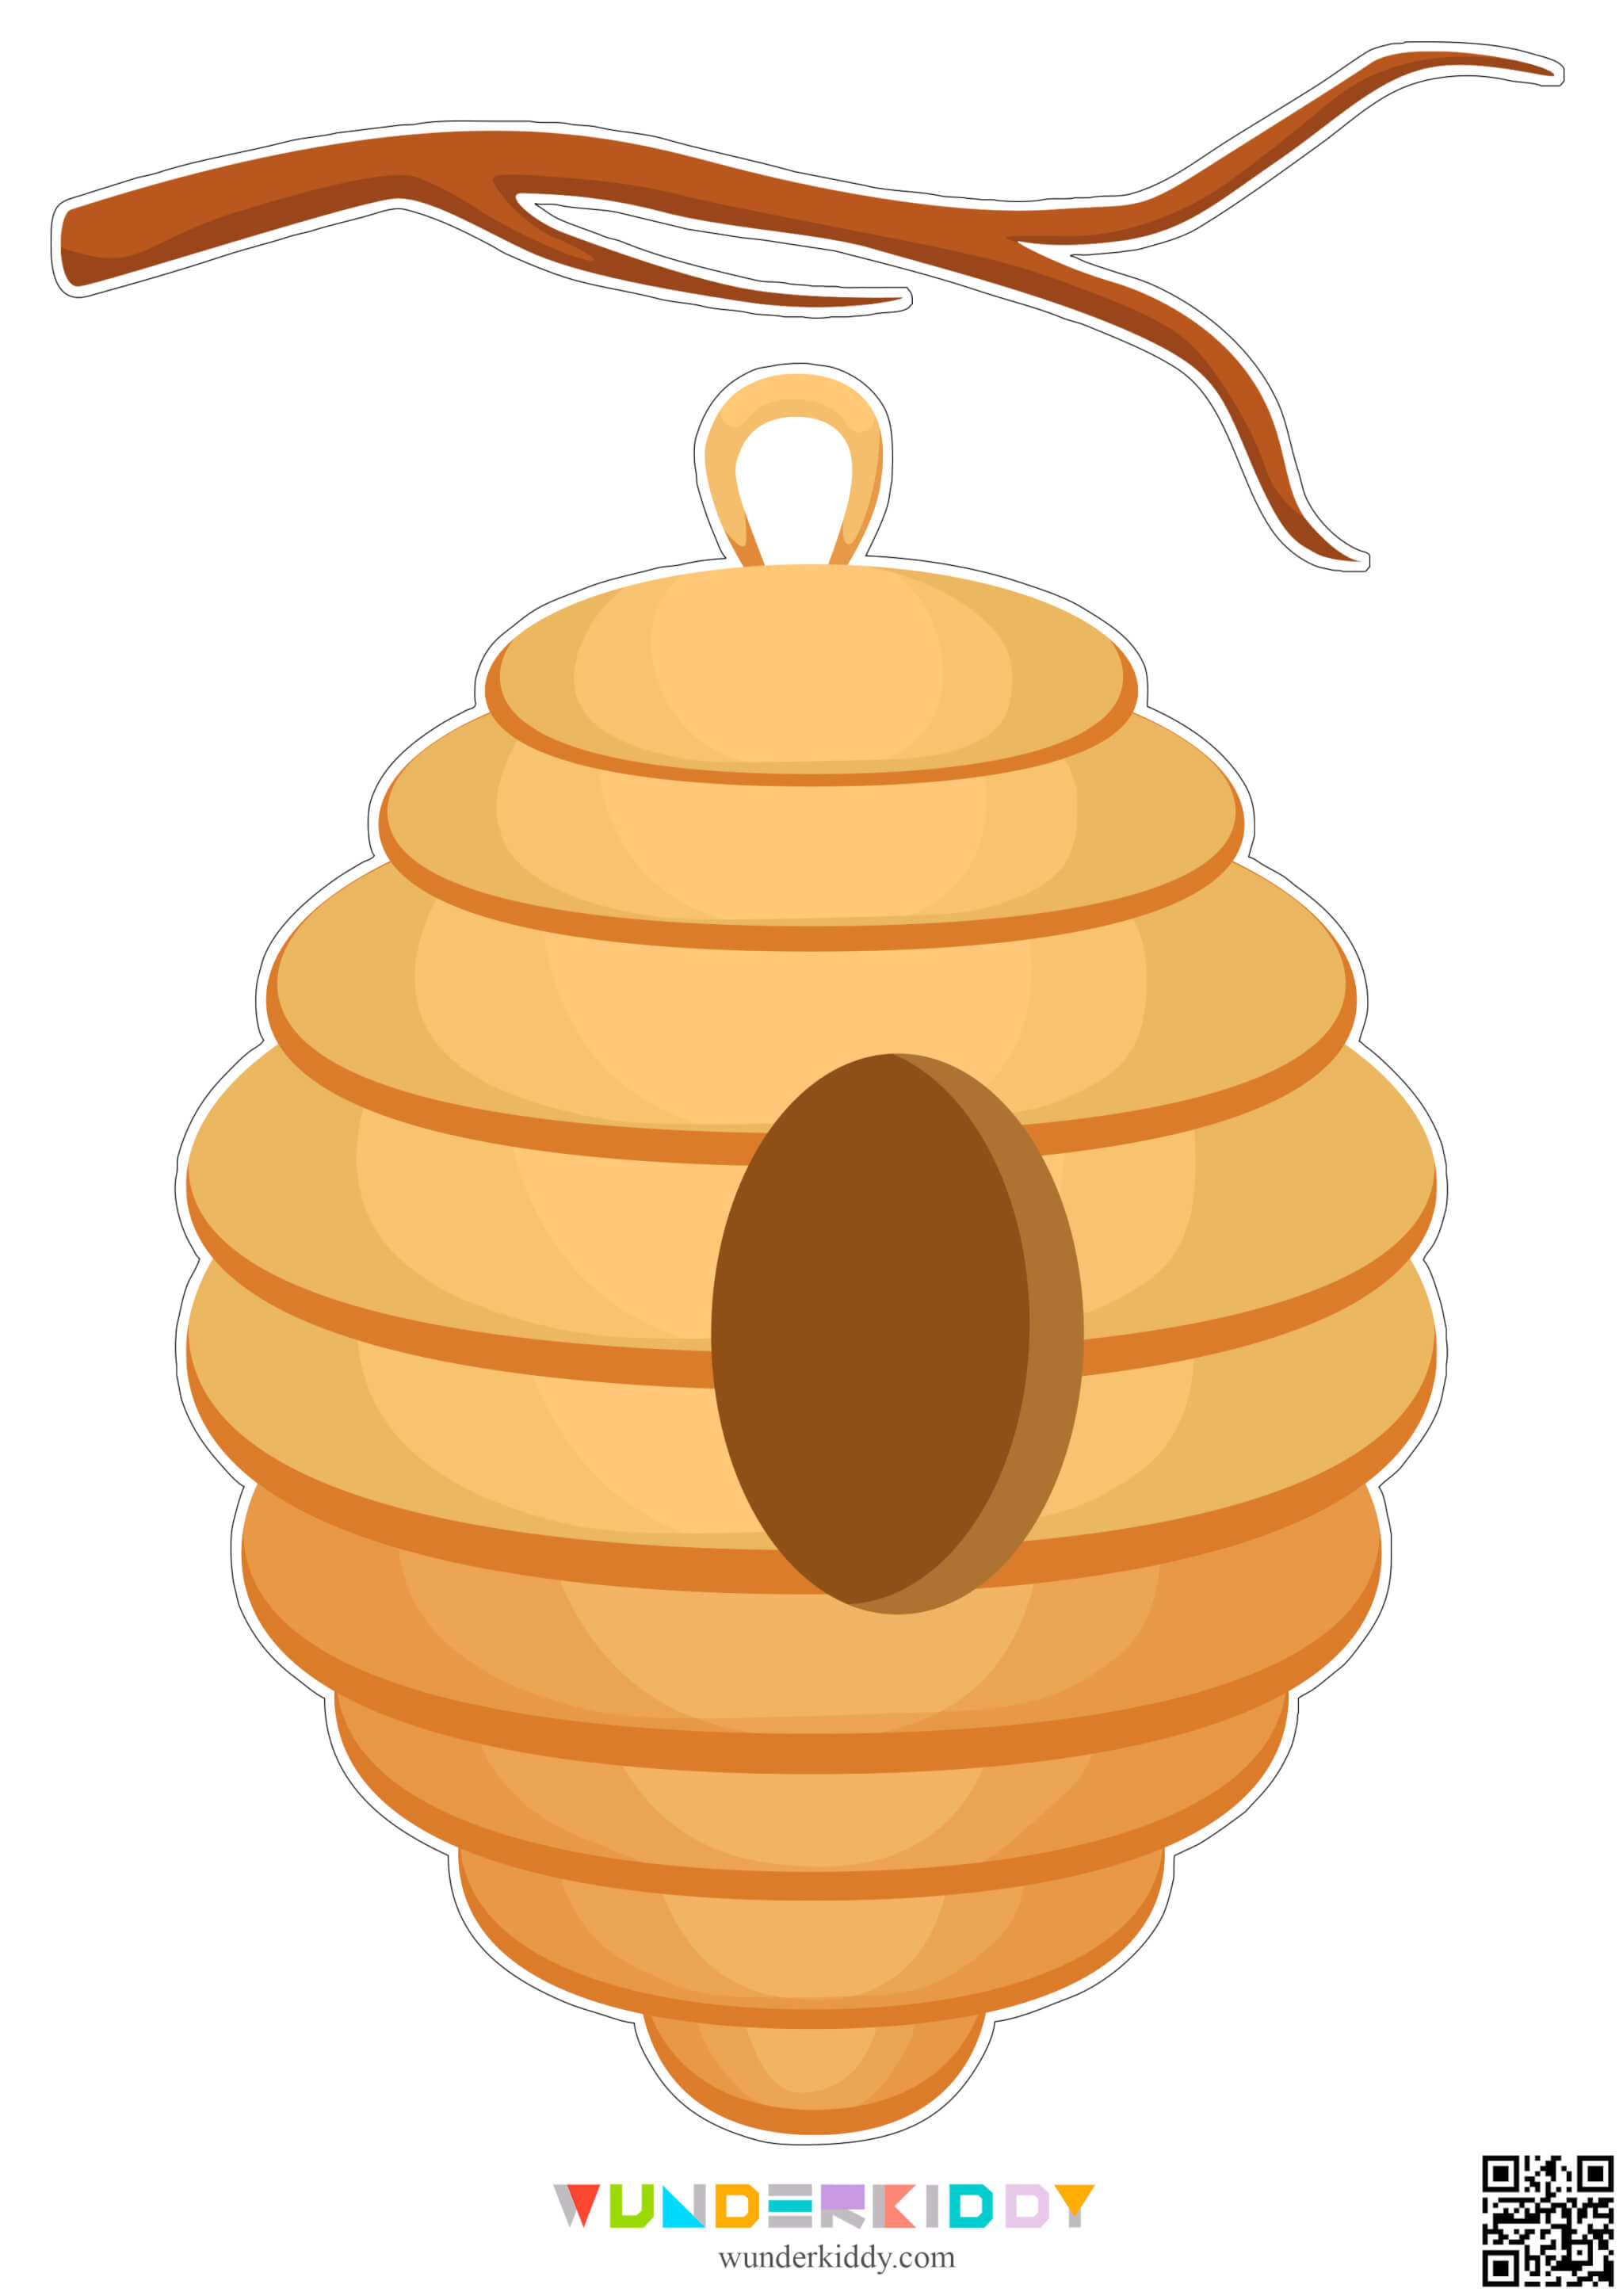 Beehive Template for Workshops - Image 6